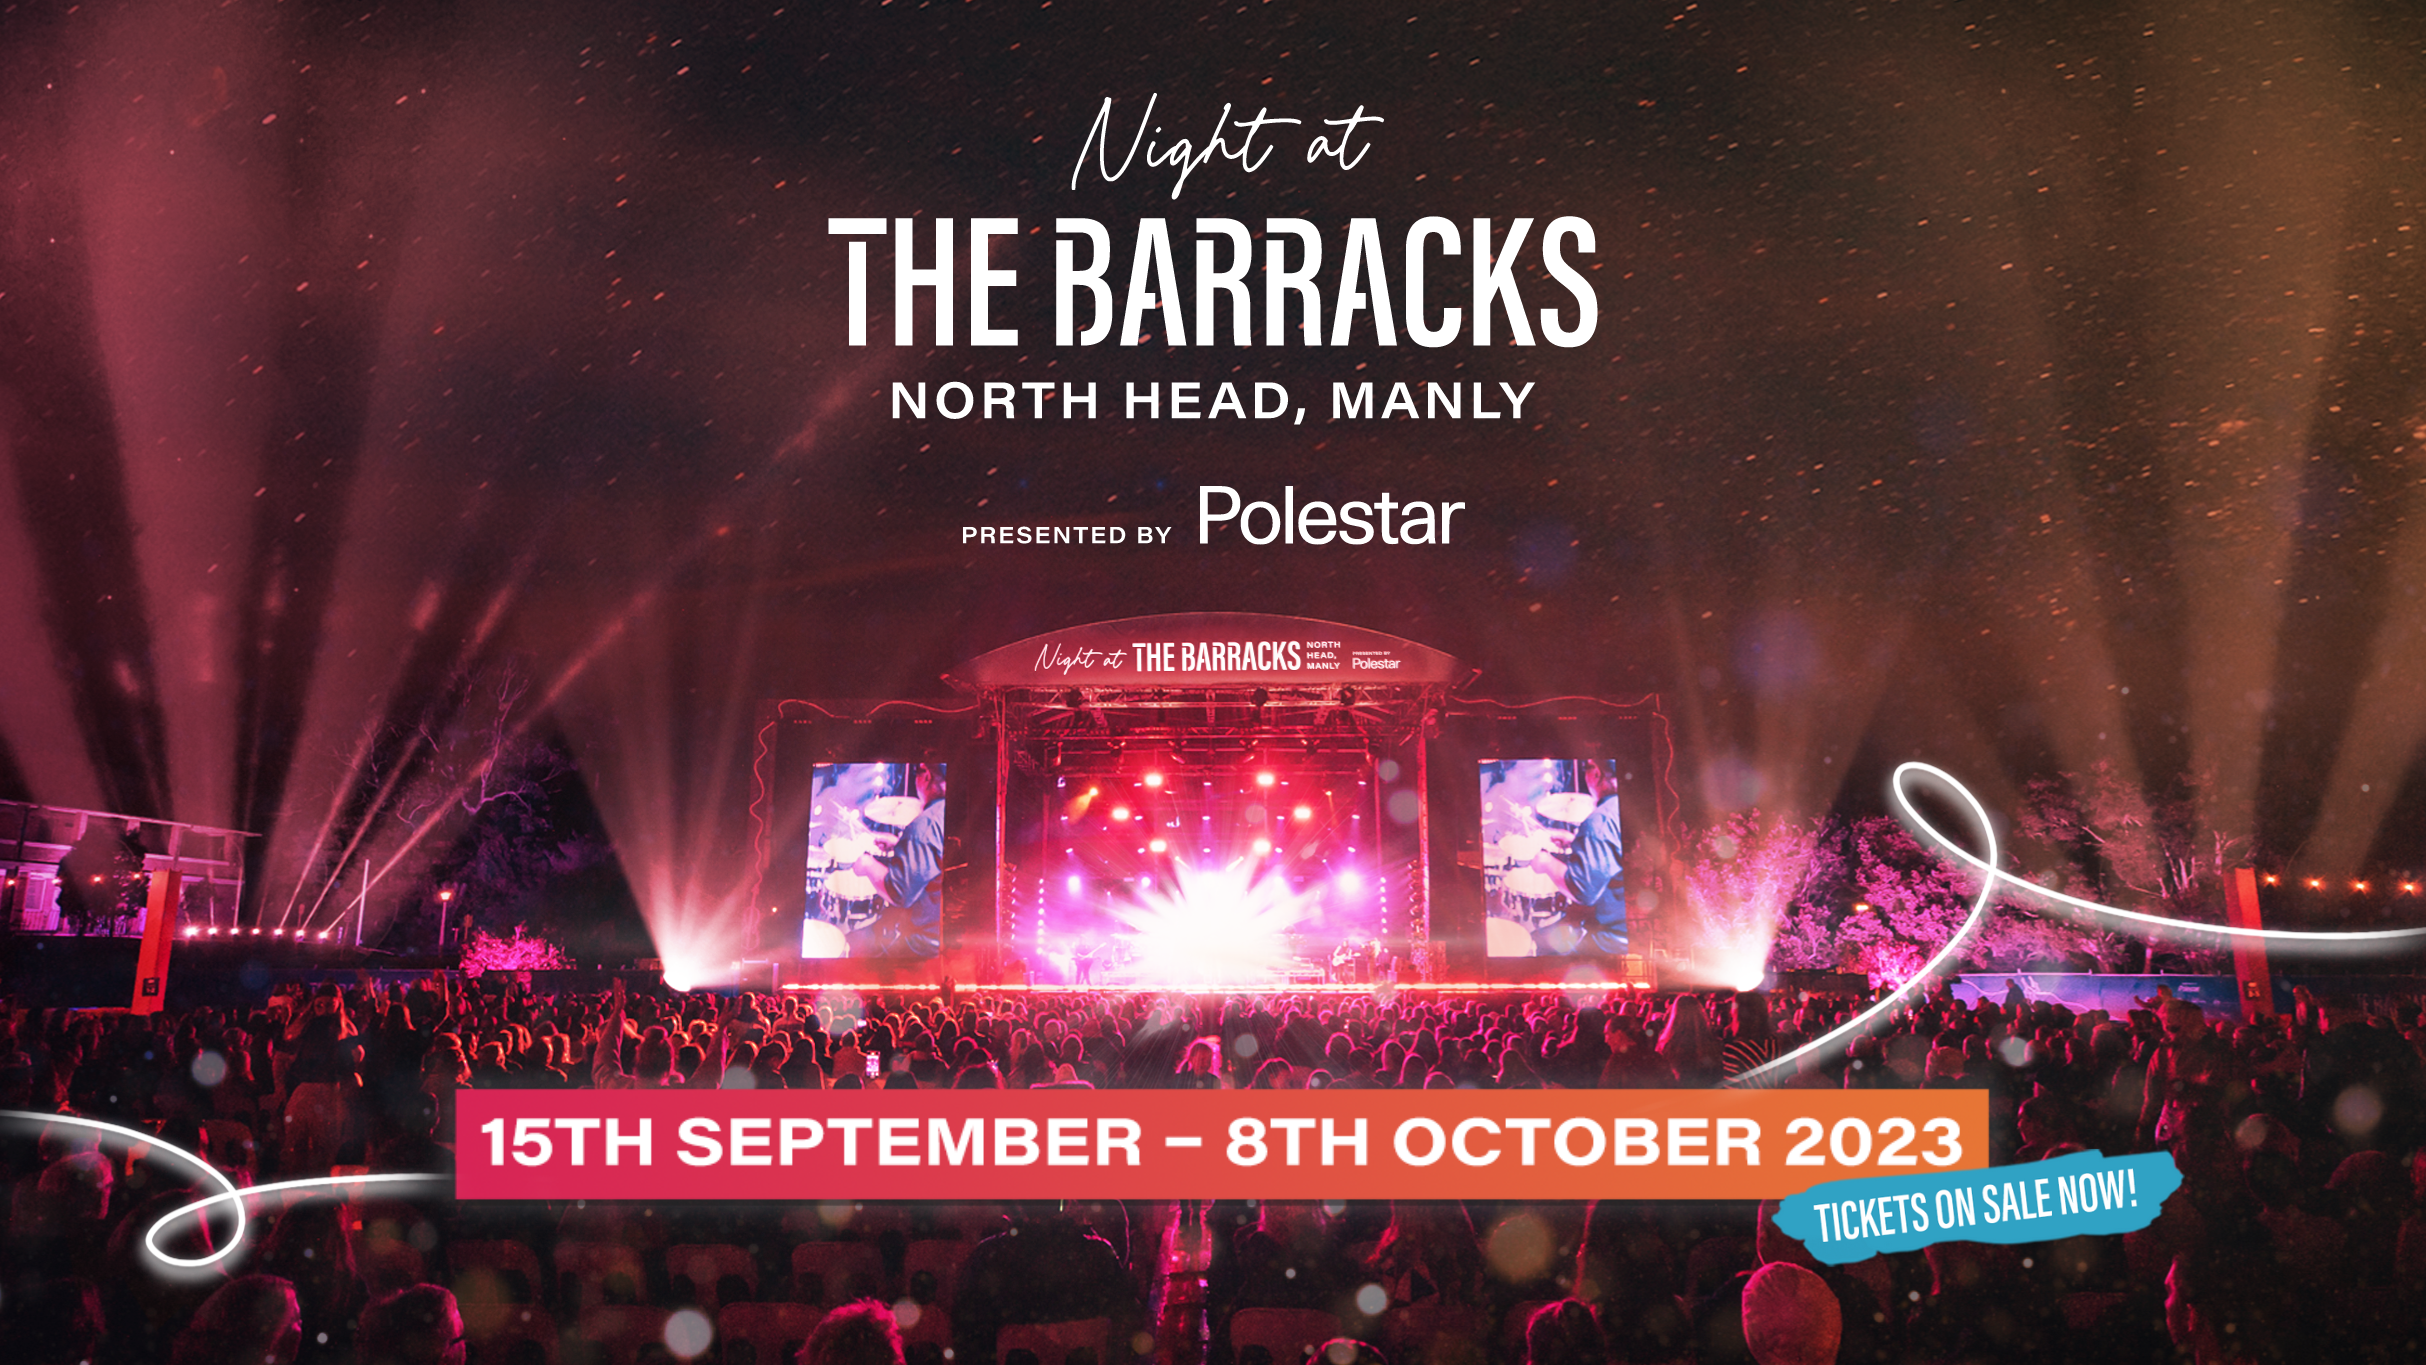 Image used with permission from Ticketmaster | Night at the Barracks - Tina Arena tickets